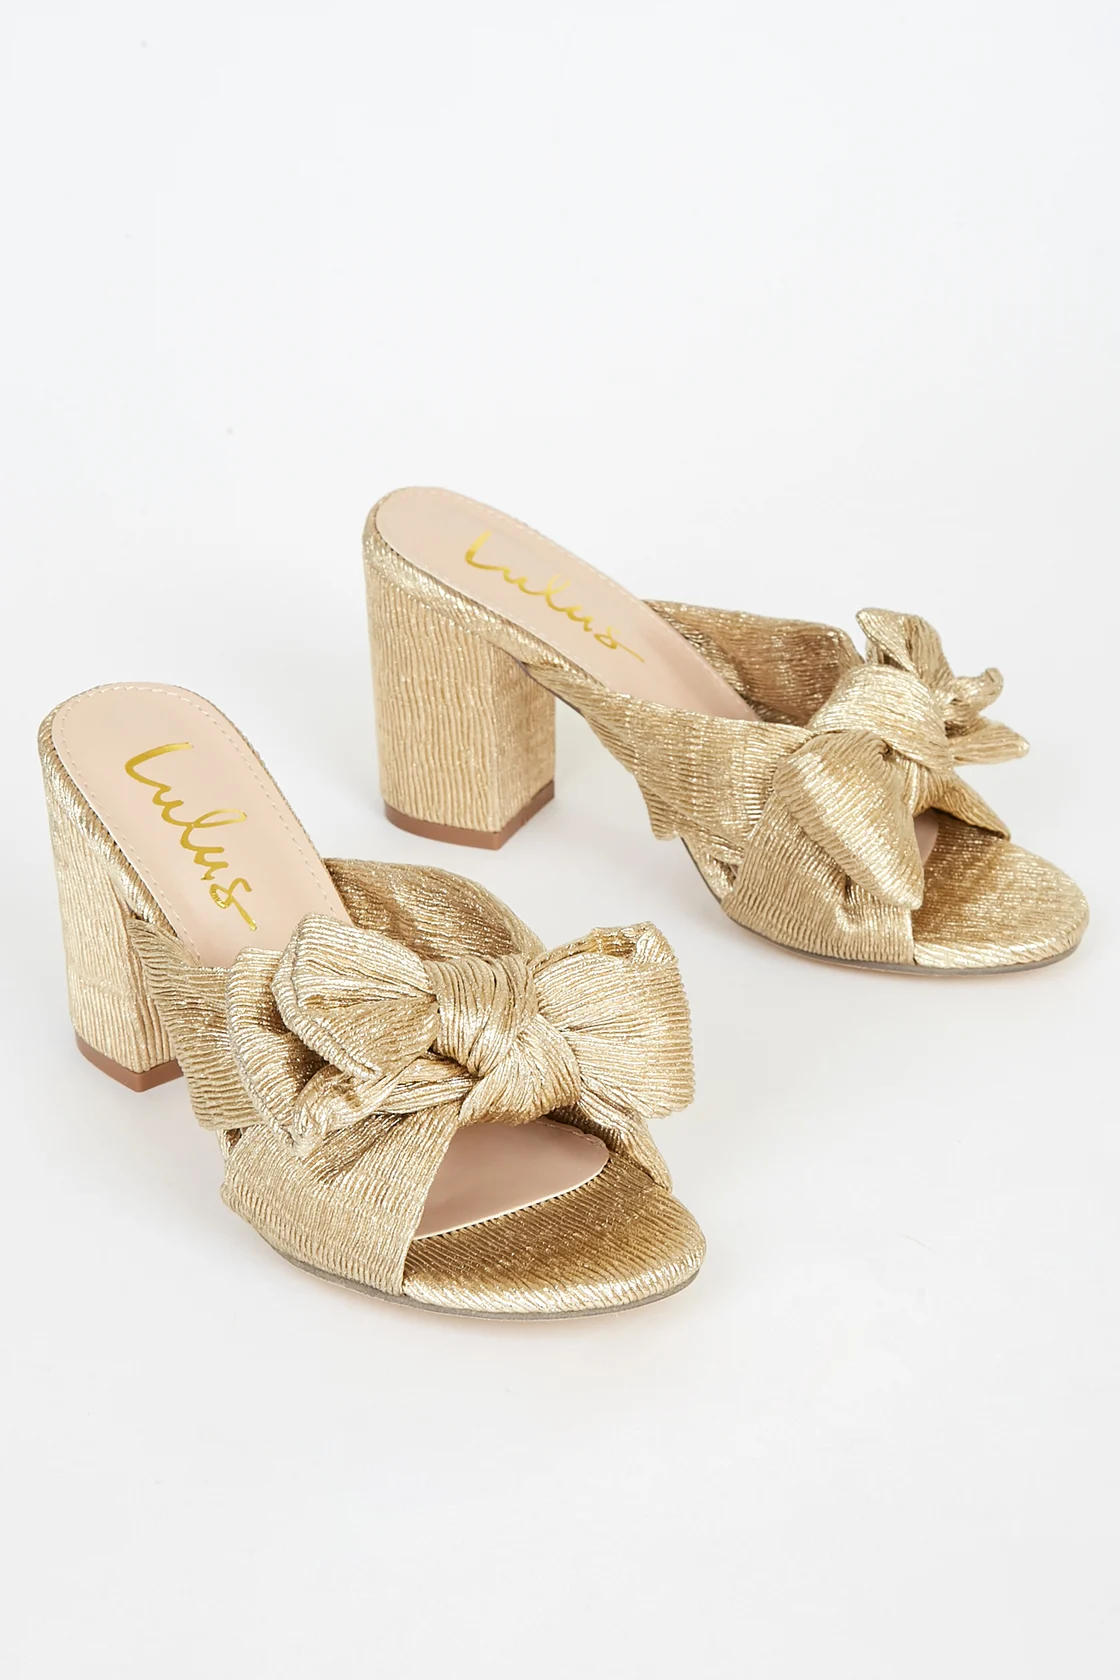 Gold sandals from Lulus